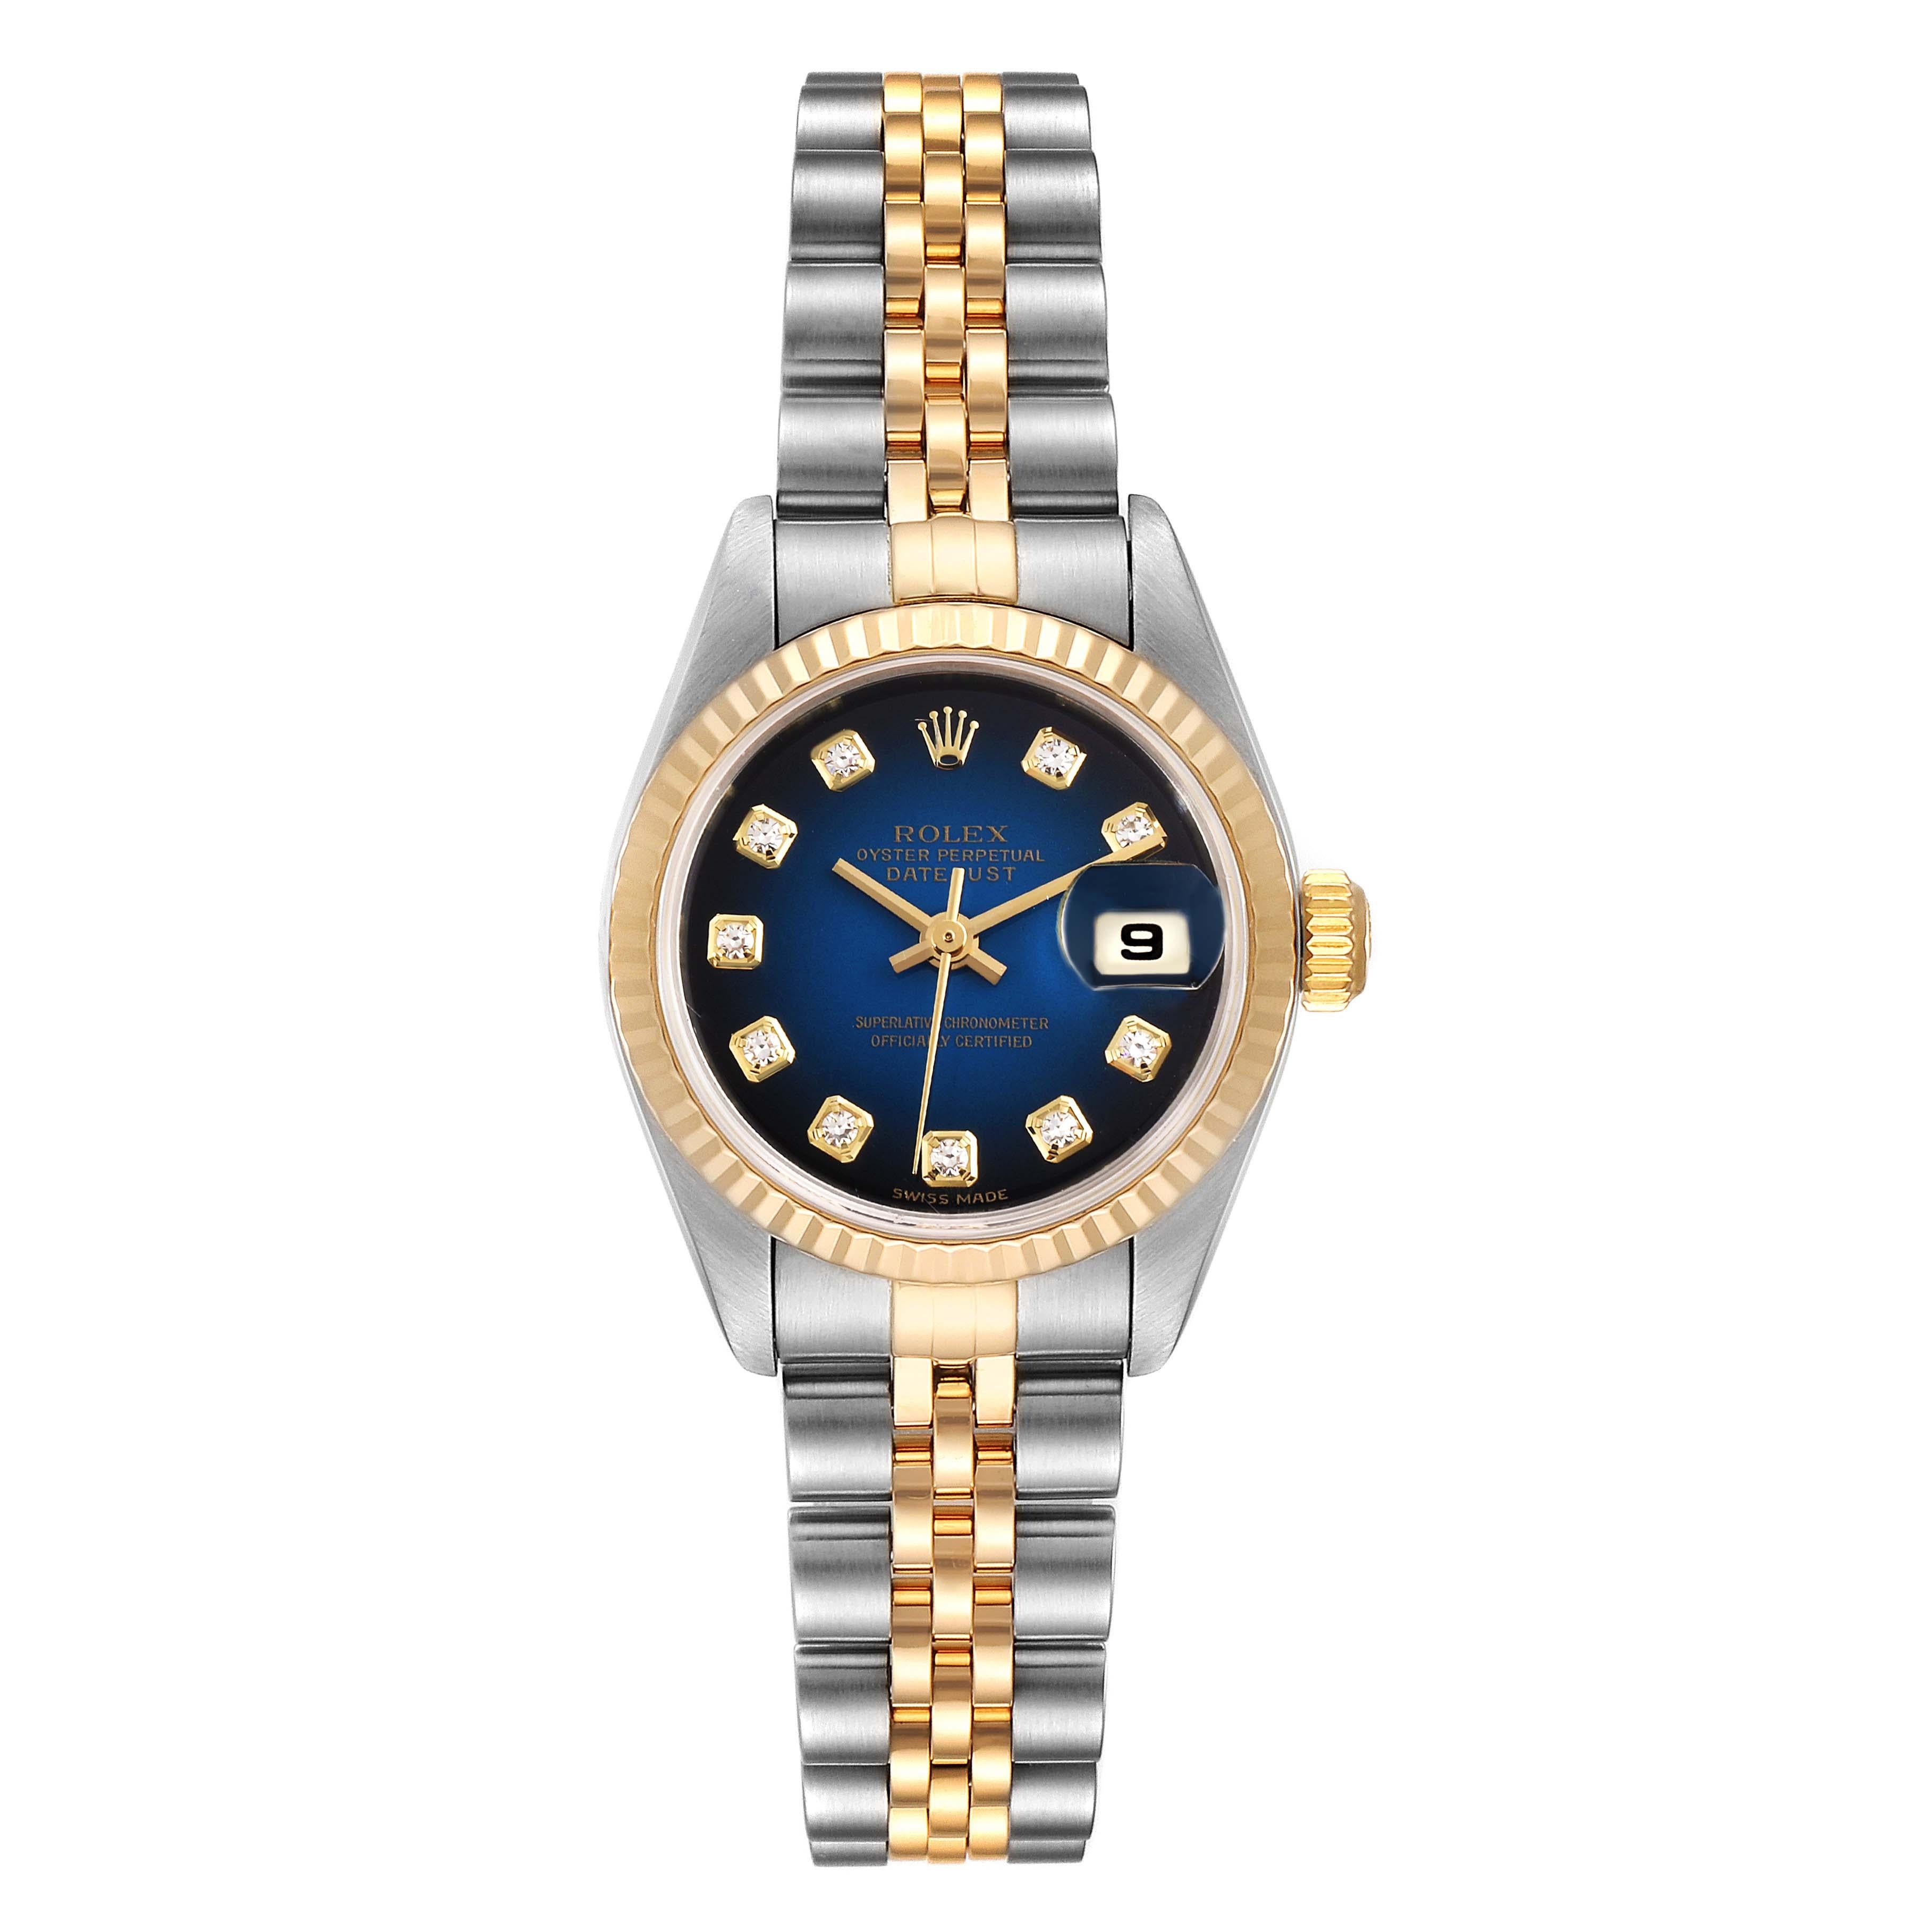 Rolex Datejust Steel Yellow Gold Blue Vignette Diamond Ladies Watch 79173. Officially certified chronometer self-winding movement. Stainless steel oyster case 26.0 mm in diameter. Rolex logo on a 18K yellow gold crown. 18k yellow gold fluted bezel.